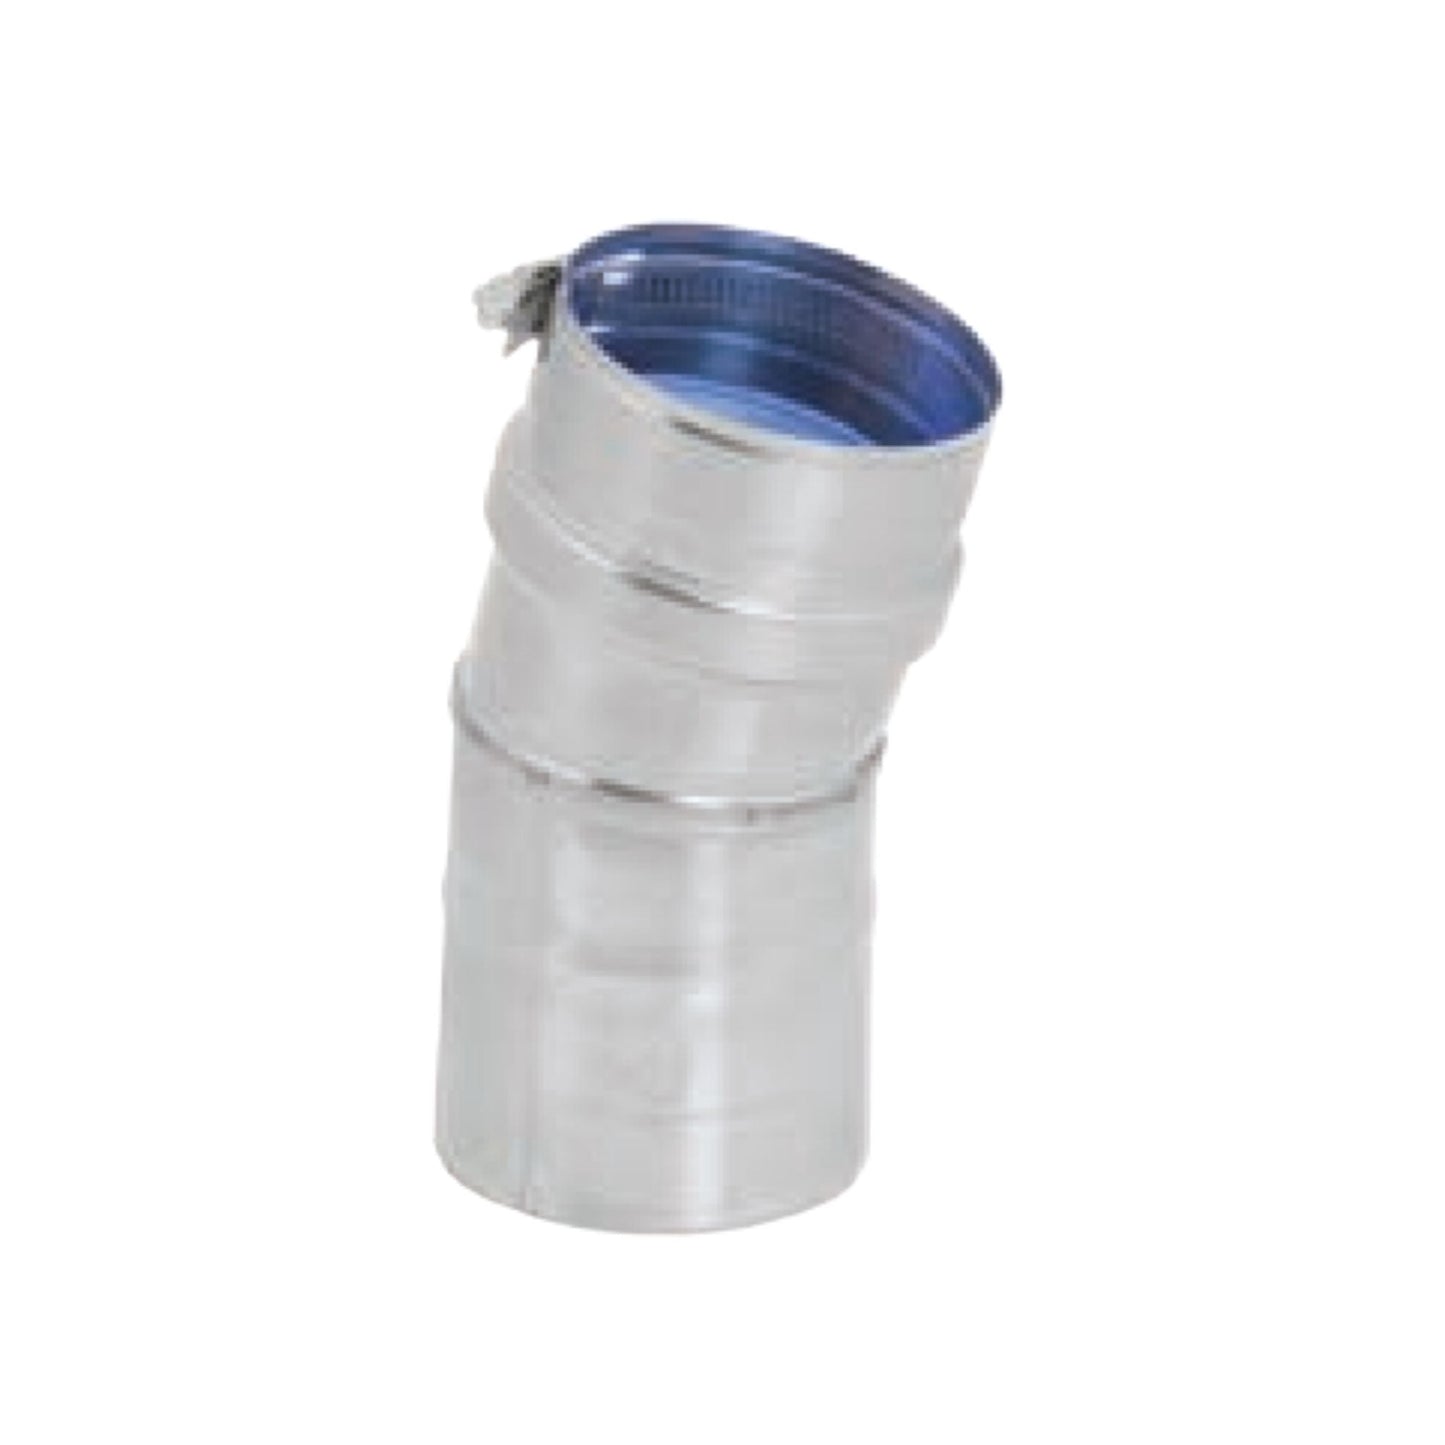 DuraVent FasNSeal 3" 15 Degree 29-4C Stainless Steel Elbow